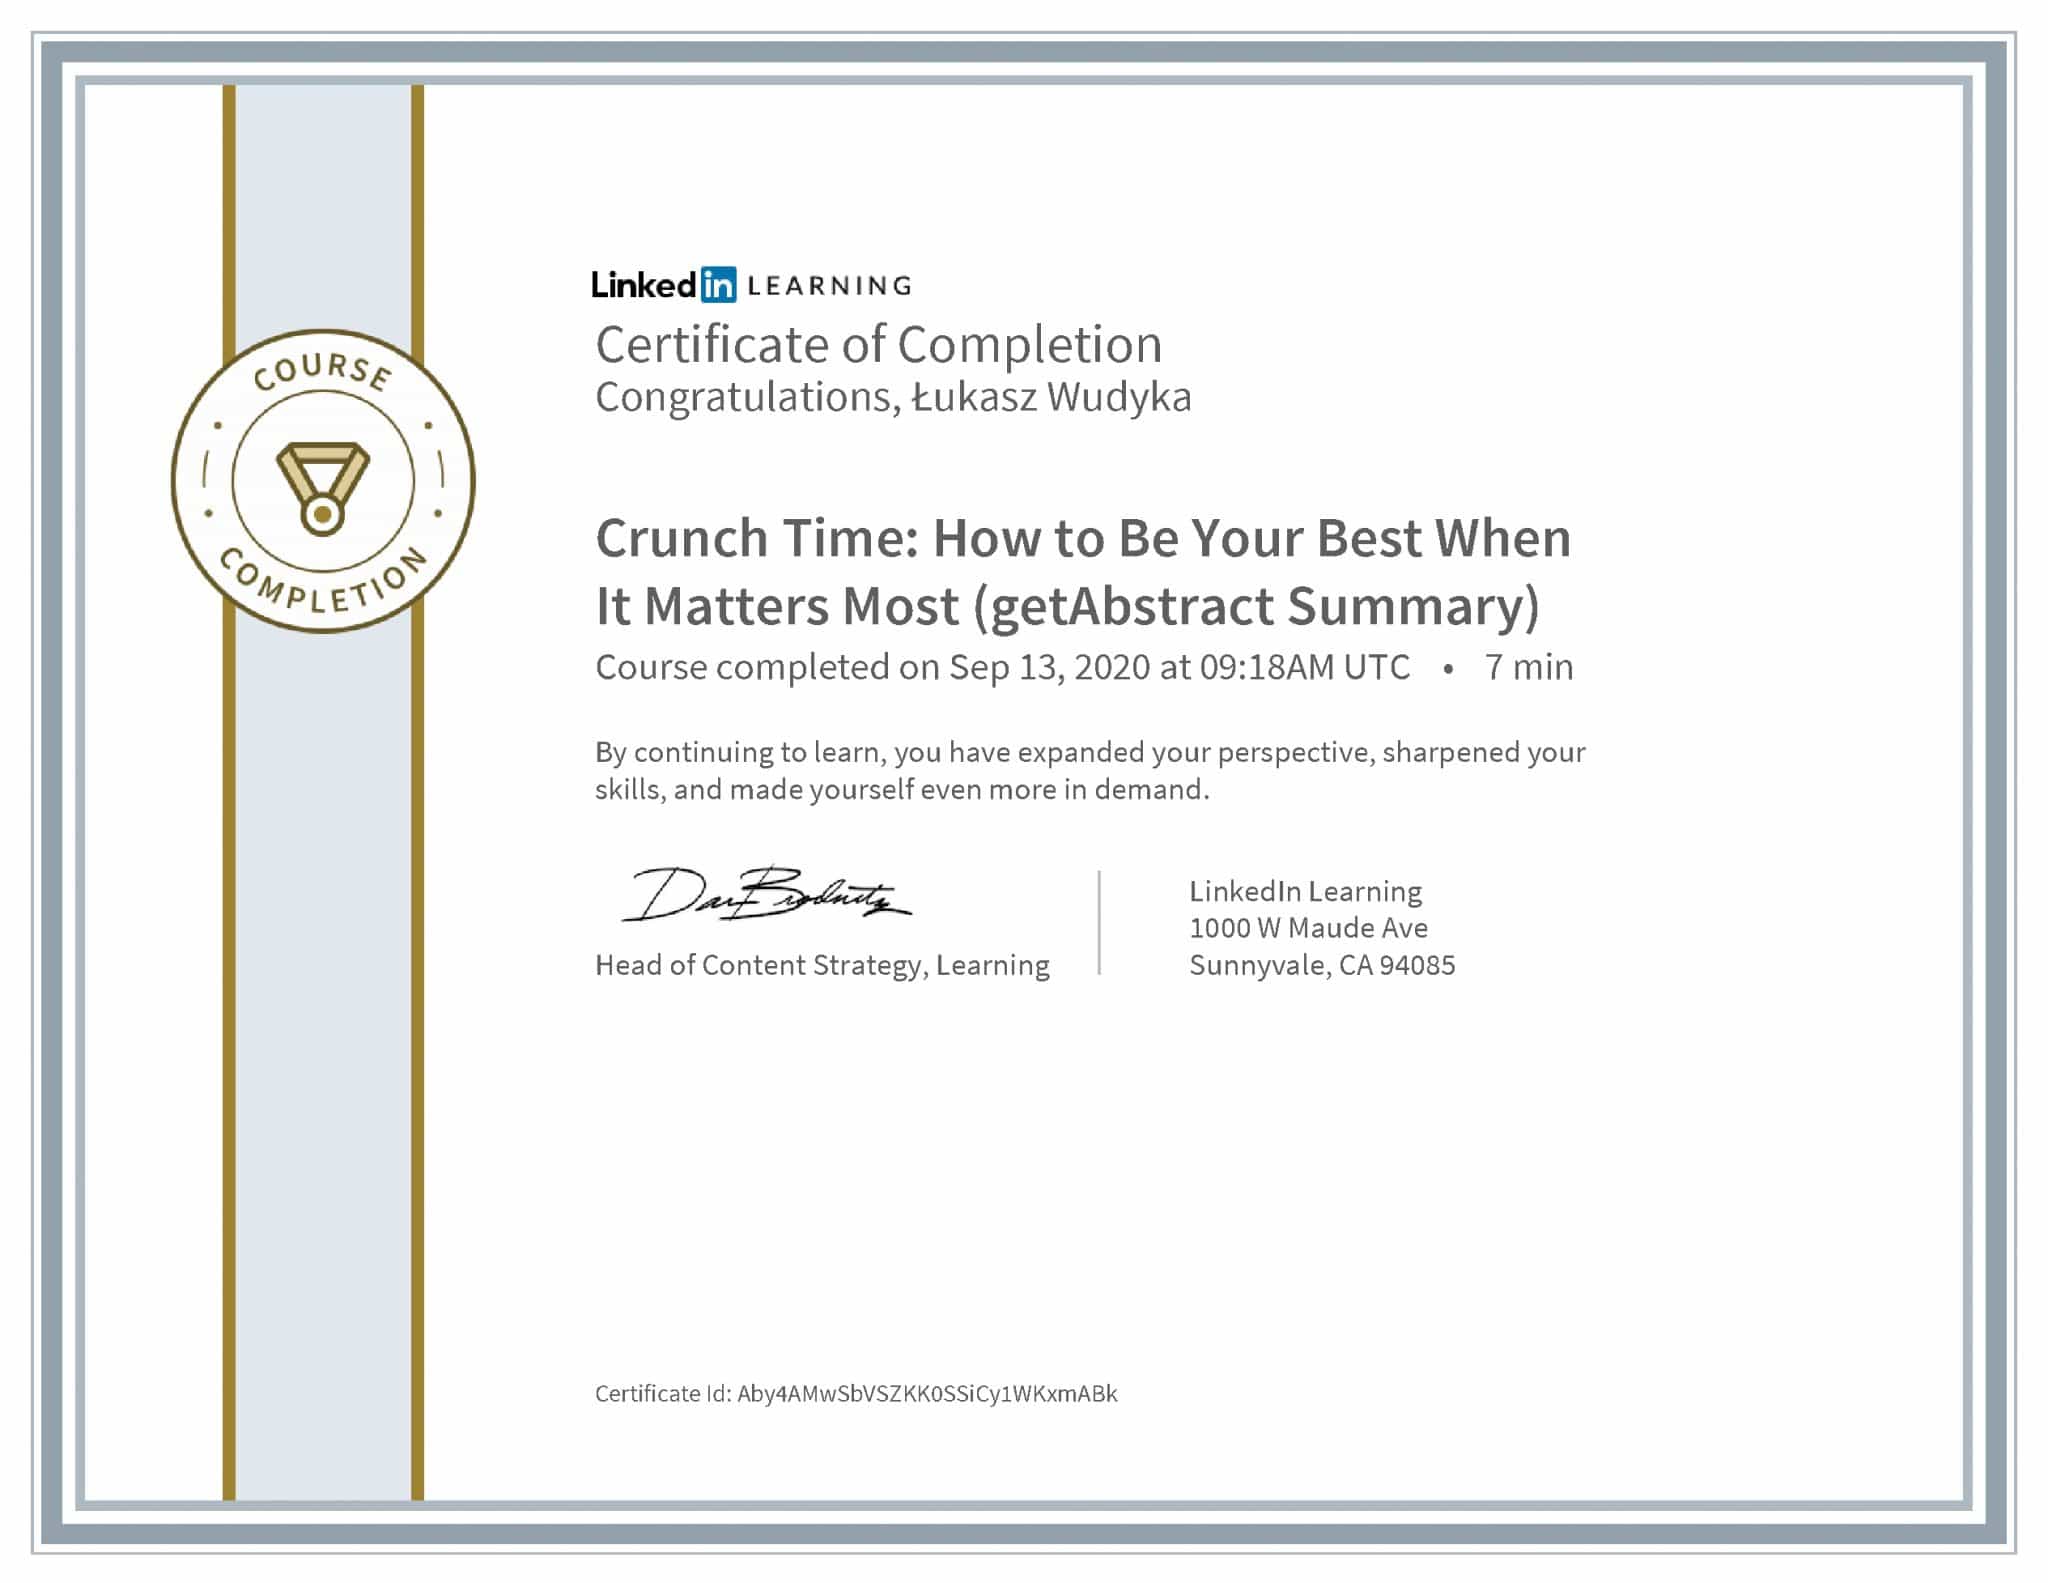 Łukasz Wudyka certyfikat LinkedIn Crunch Time: How to Be Your Best When It Matters Most (getAbstract Summary)